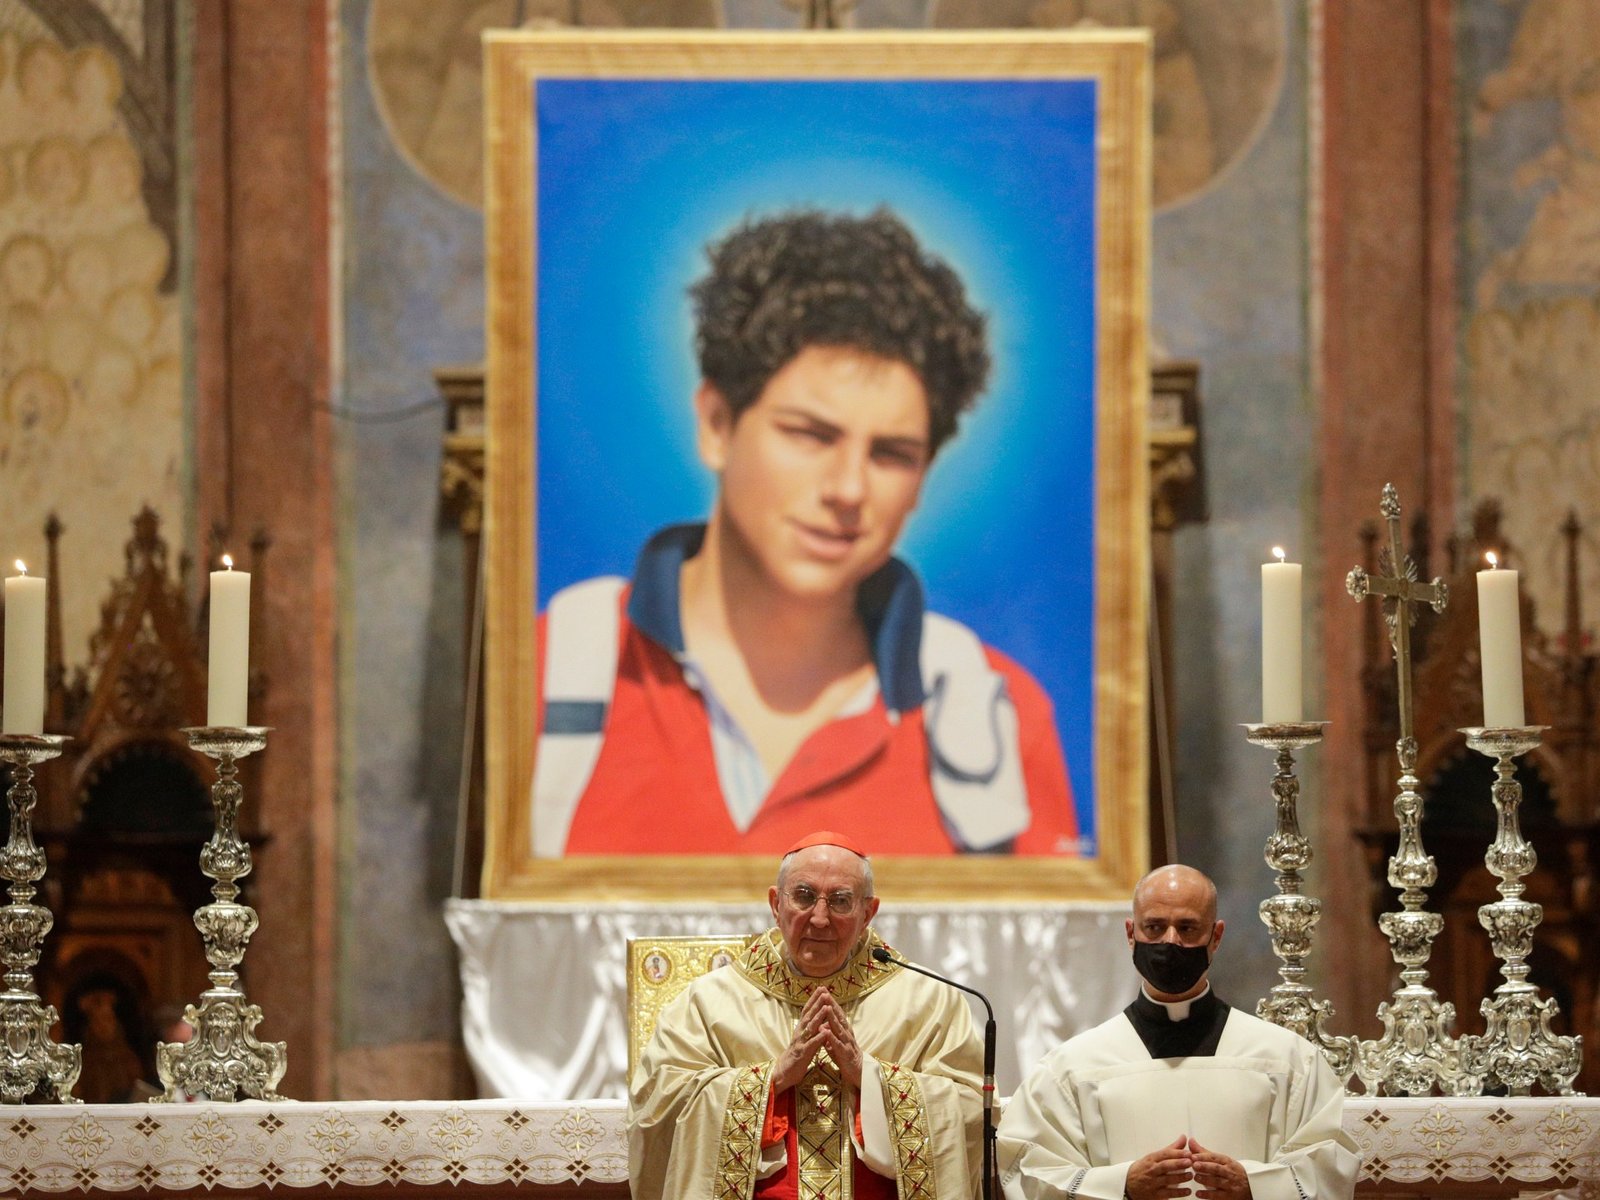 ‘God’s influencer’: Pope recognises Carlo Acutis as first millennial saint | Religion News